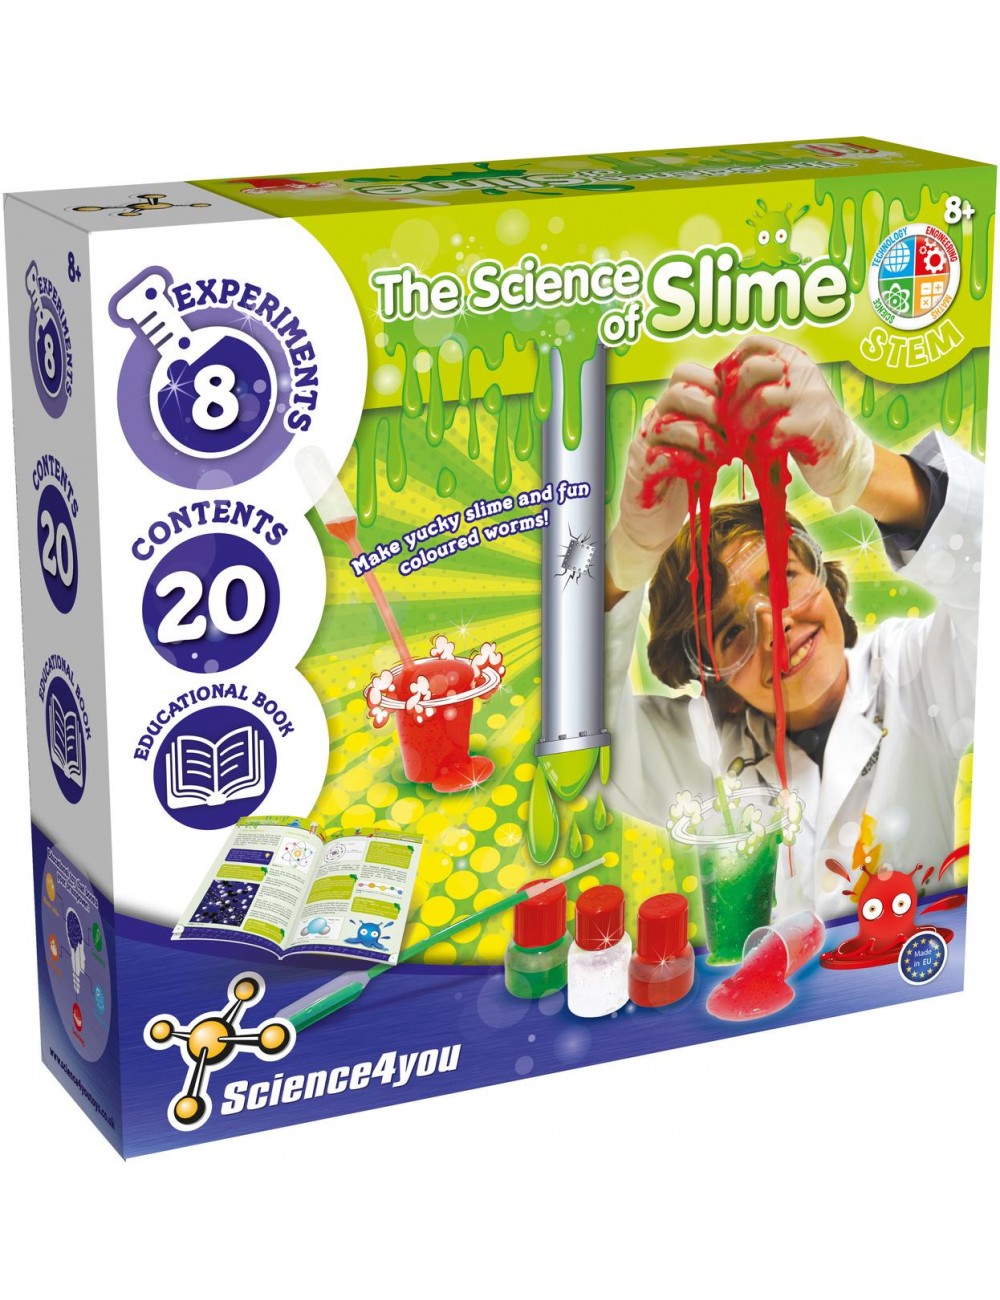 Slime Factory - Science4you 